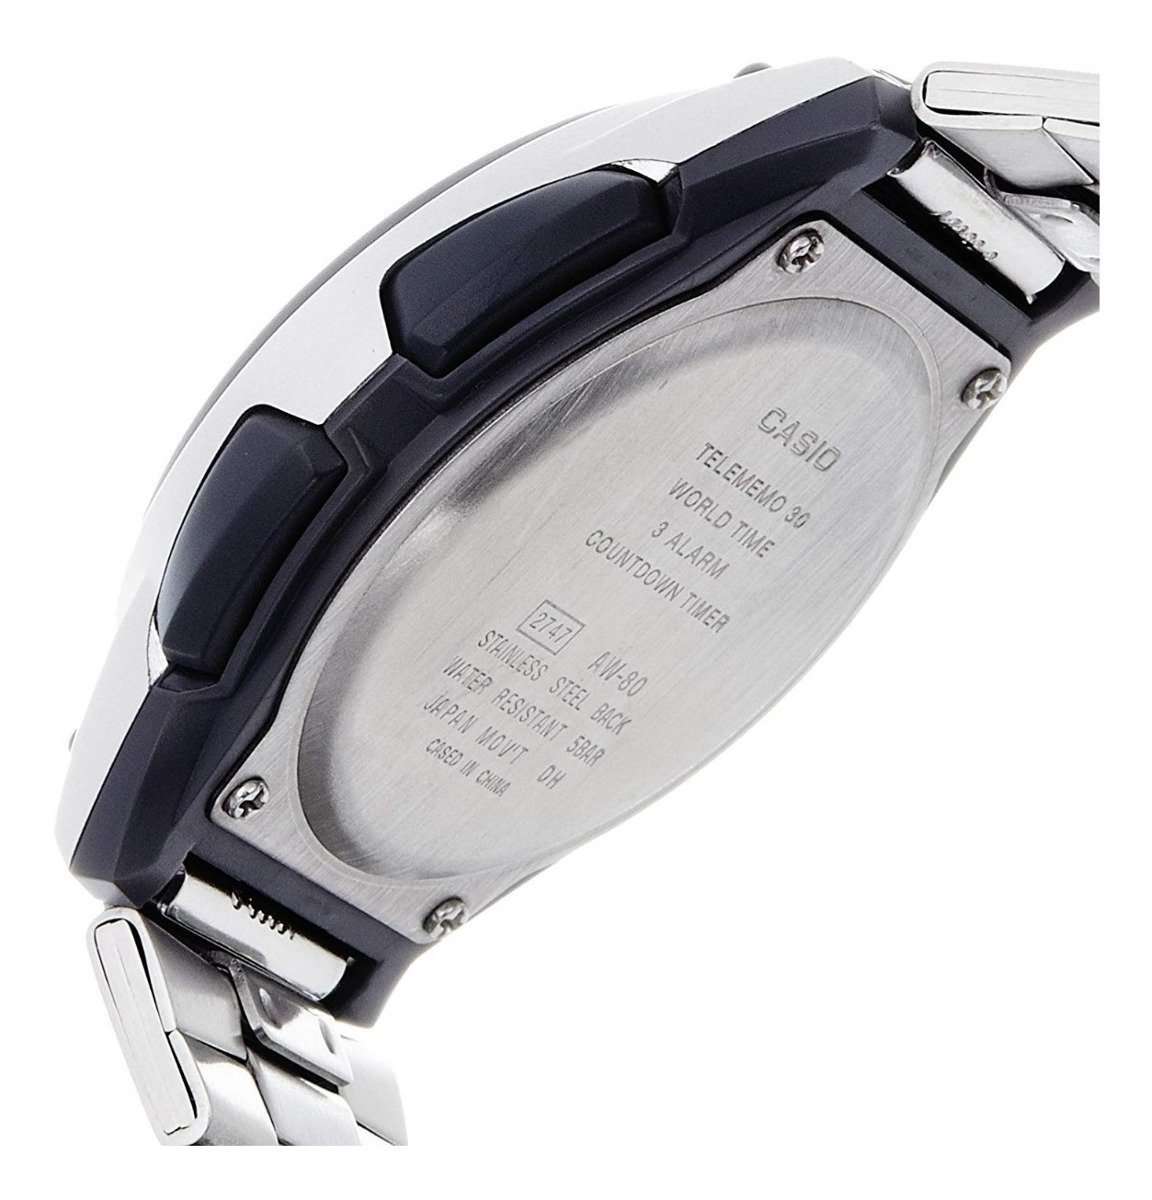 Casio AW-80D-1A2 Silver Stainless Watch for Men-Watch Portal Philippines